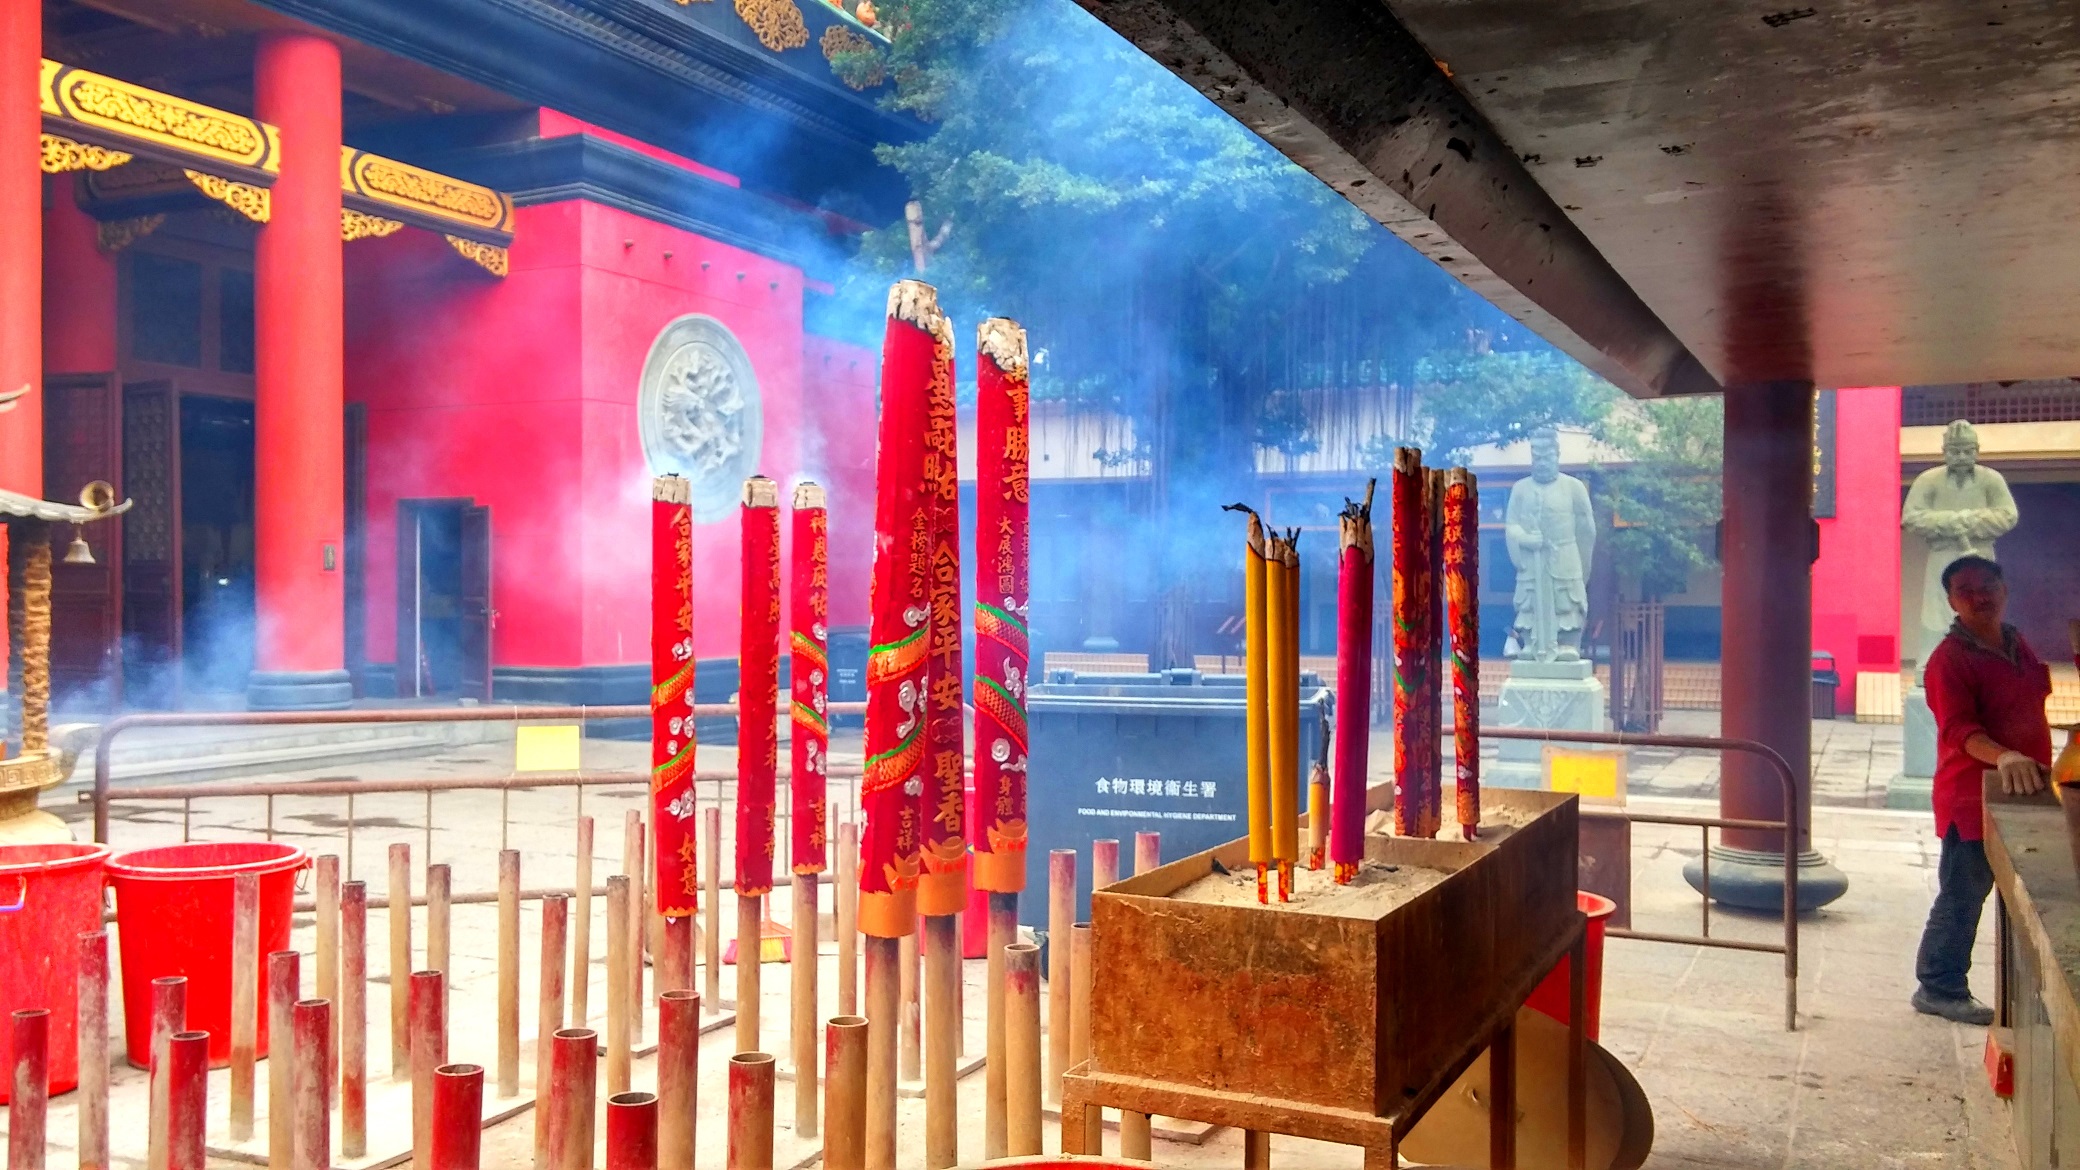 Incense sticks in Che Kung Temple.